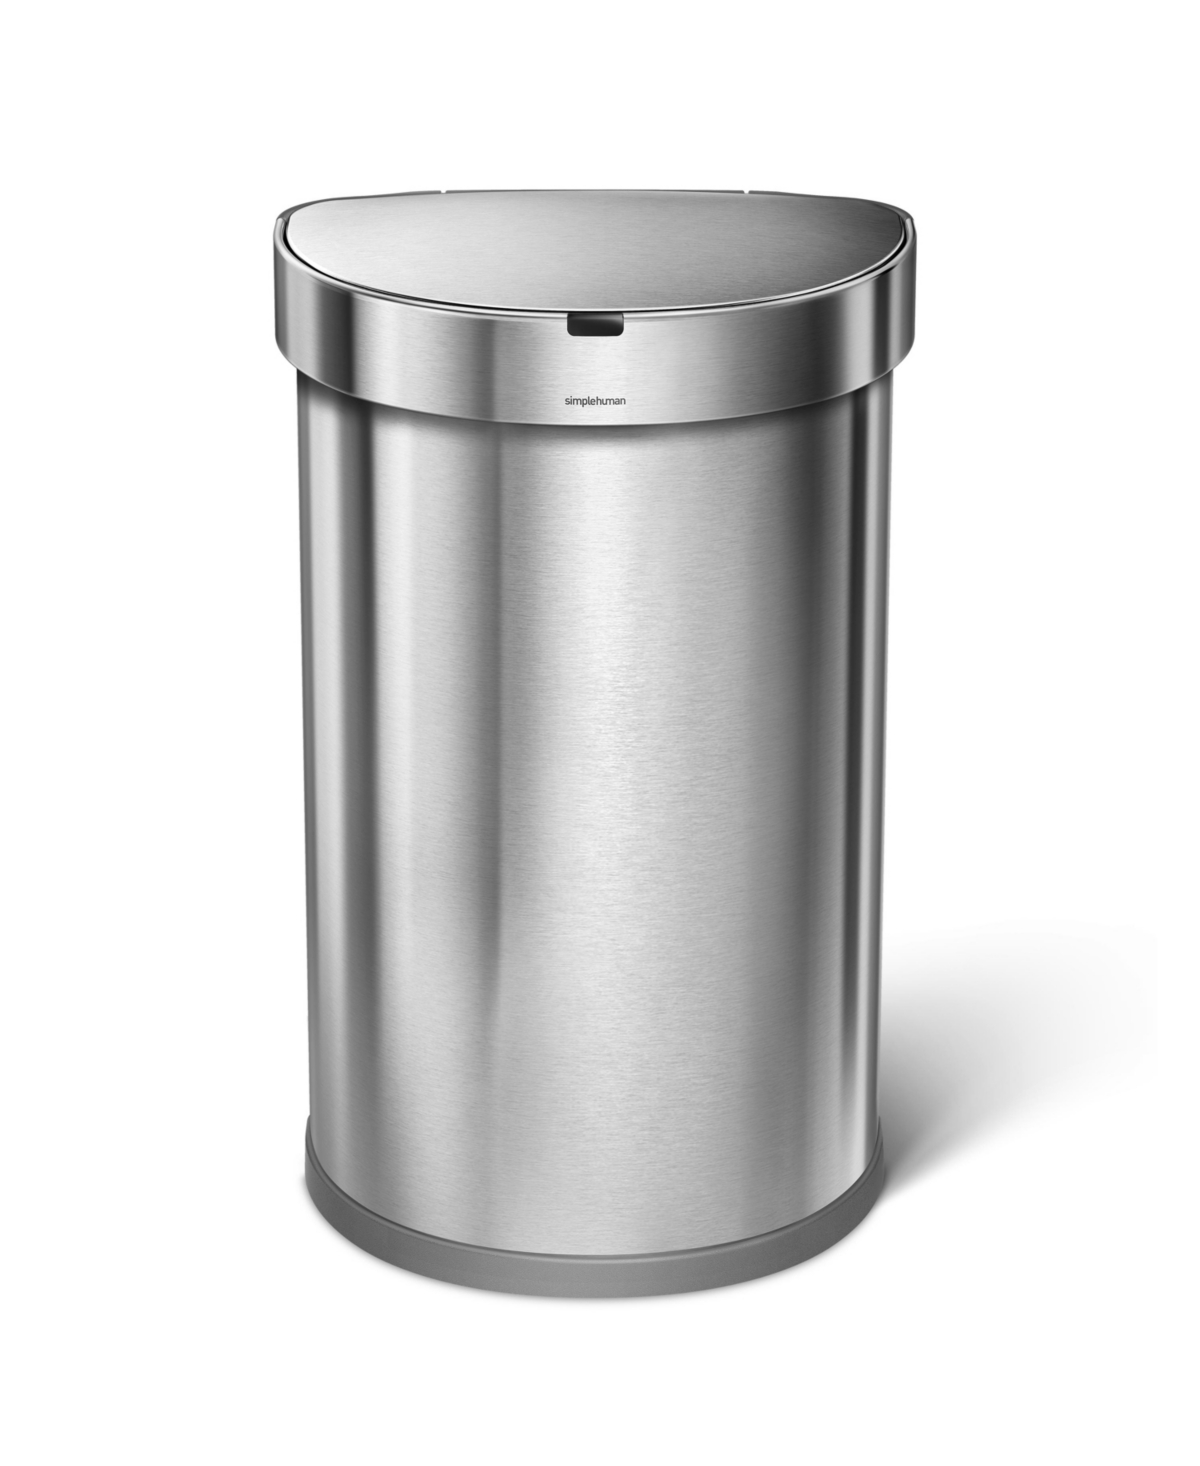 Semi-Round Sensor Trash Can, 45 Liters - Brushed Stainless Steel